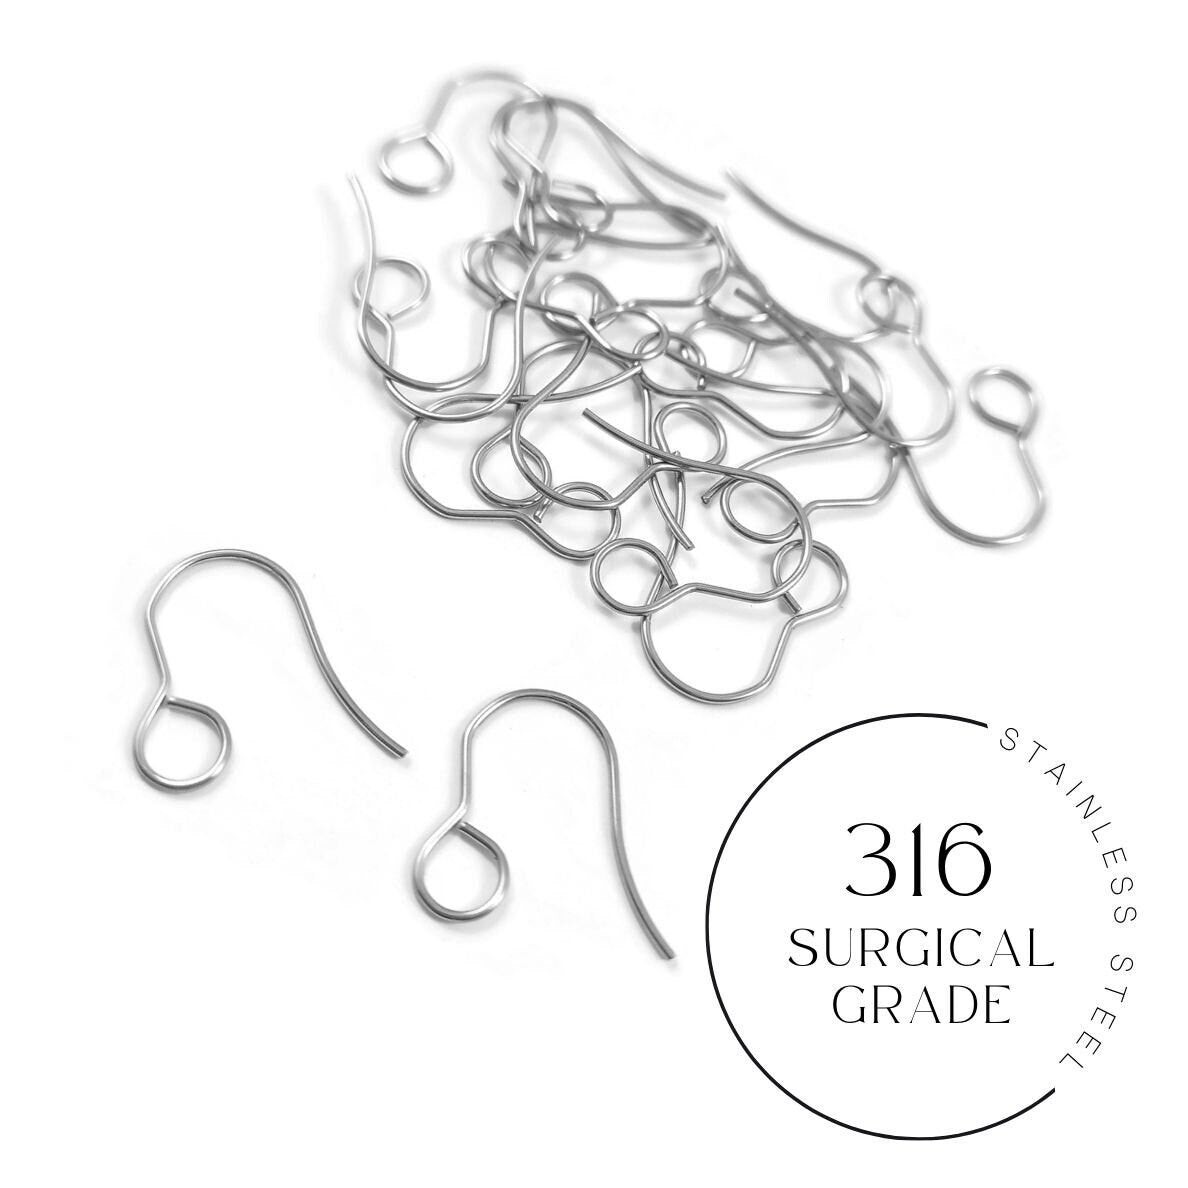 Wholesale 316 Surgical Stainless Steel Wire 